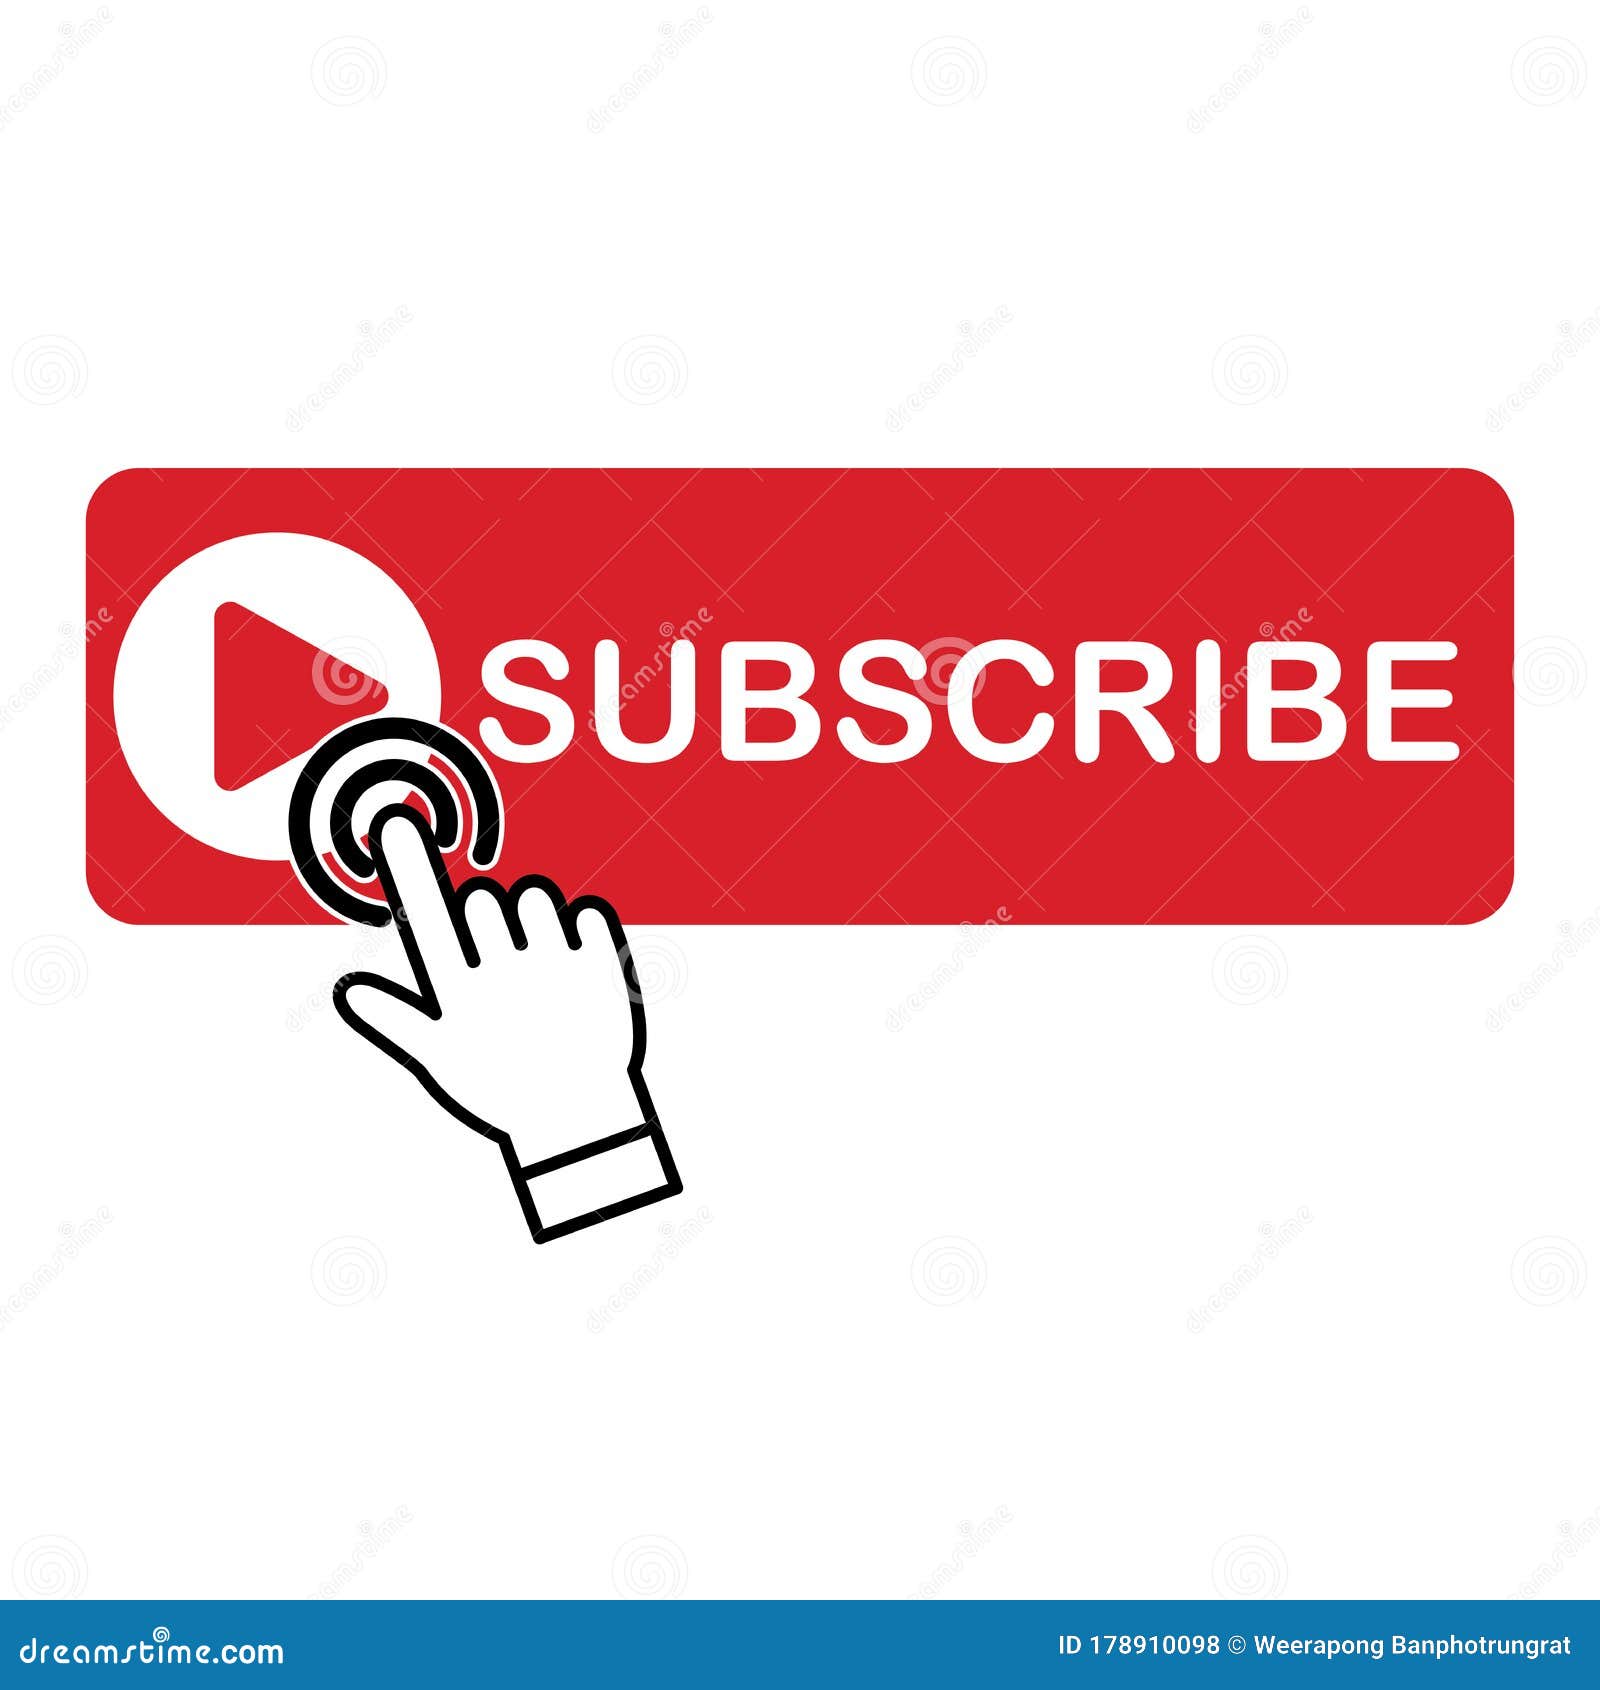 the subscribe button on youtube